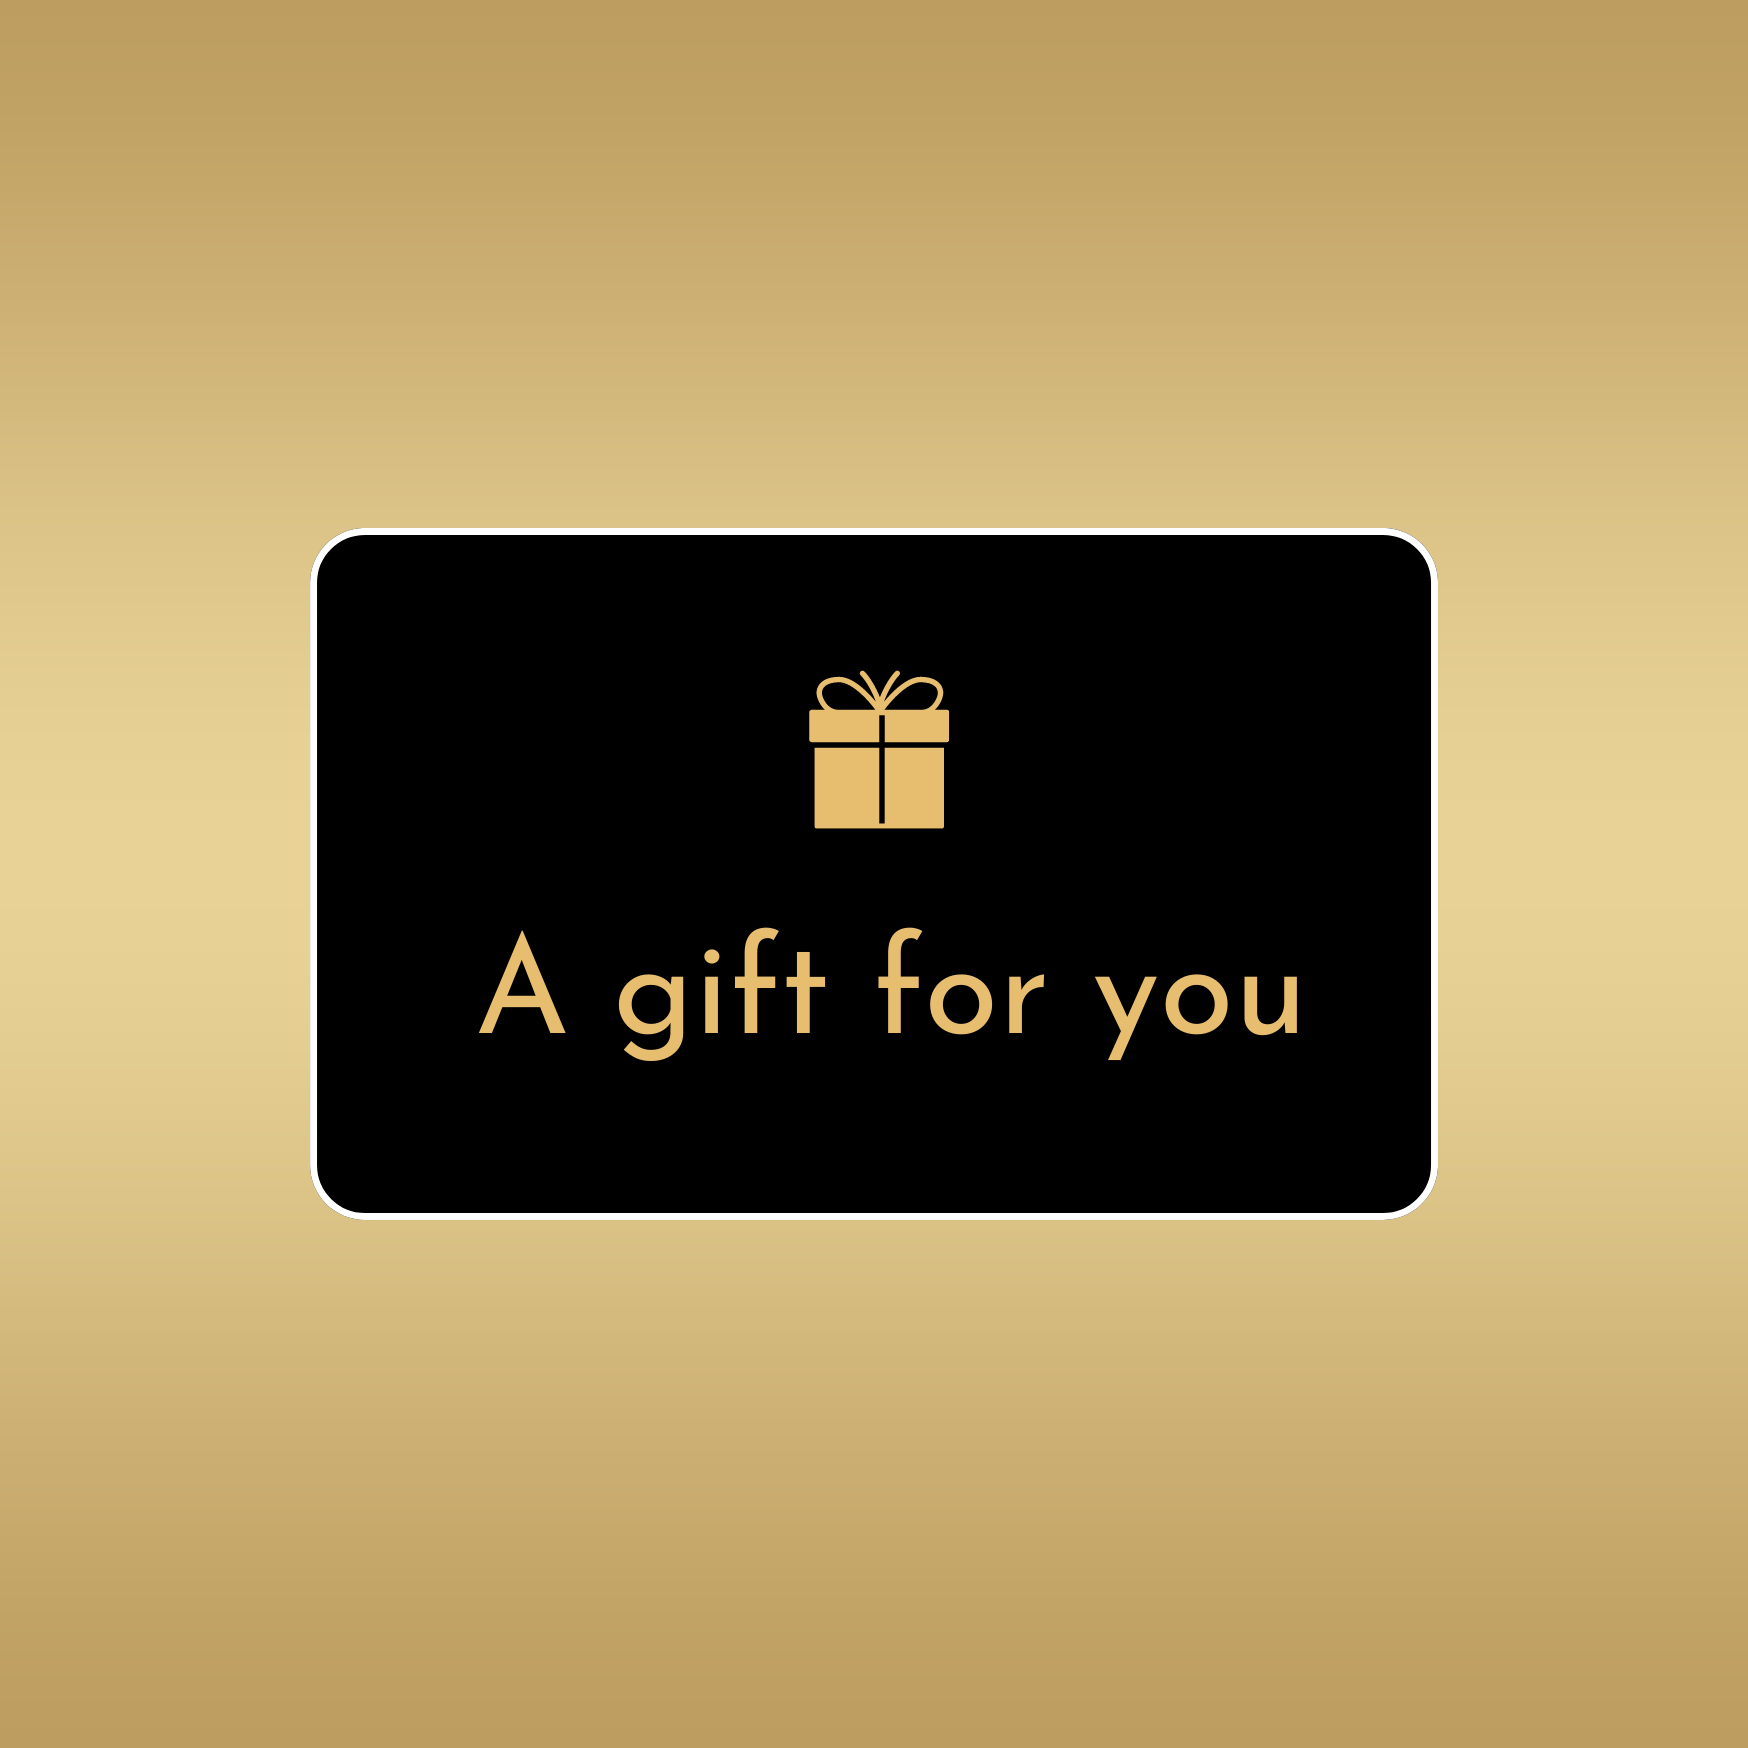 Introducing: Gift Cards